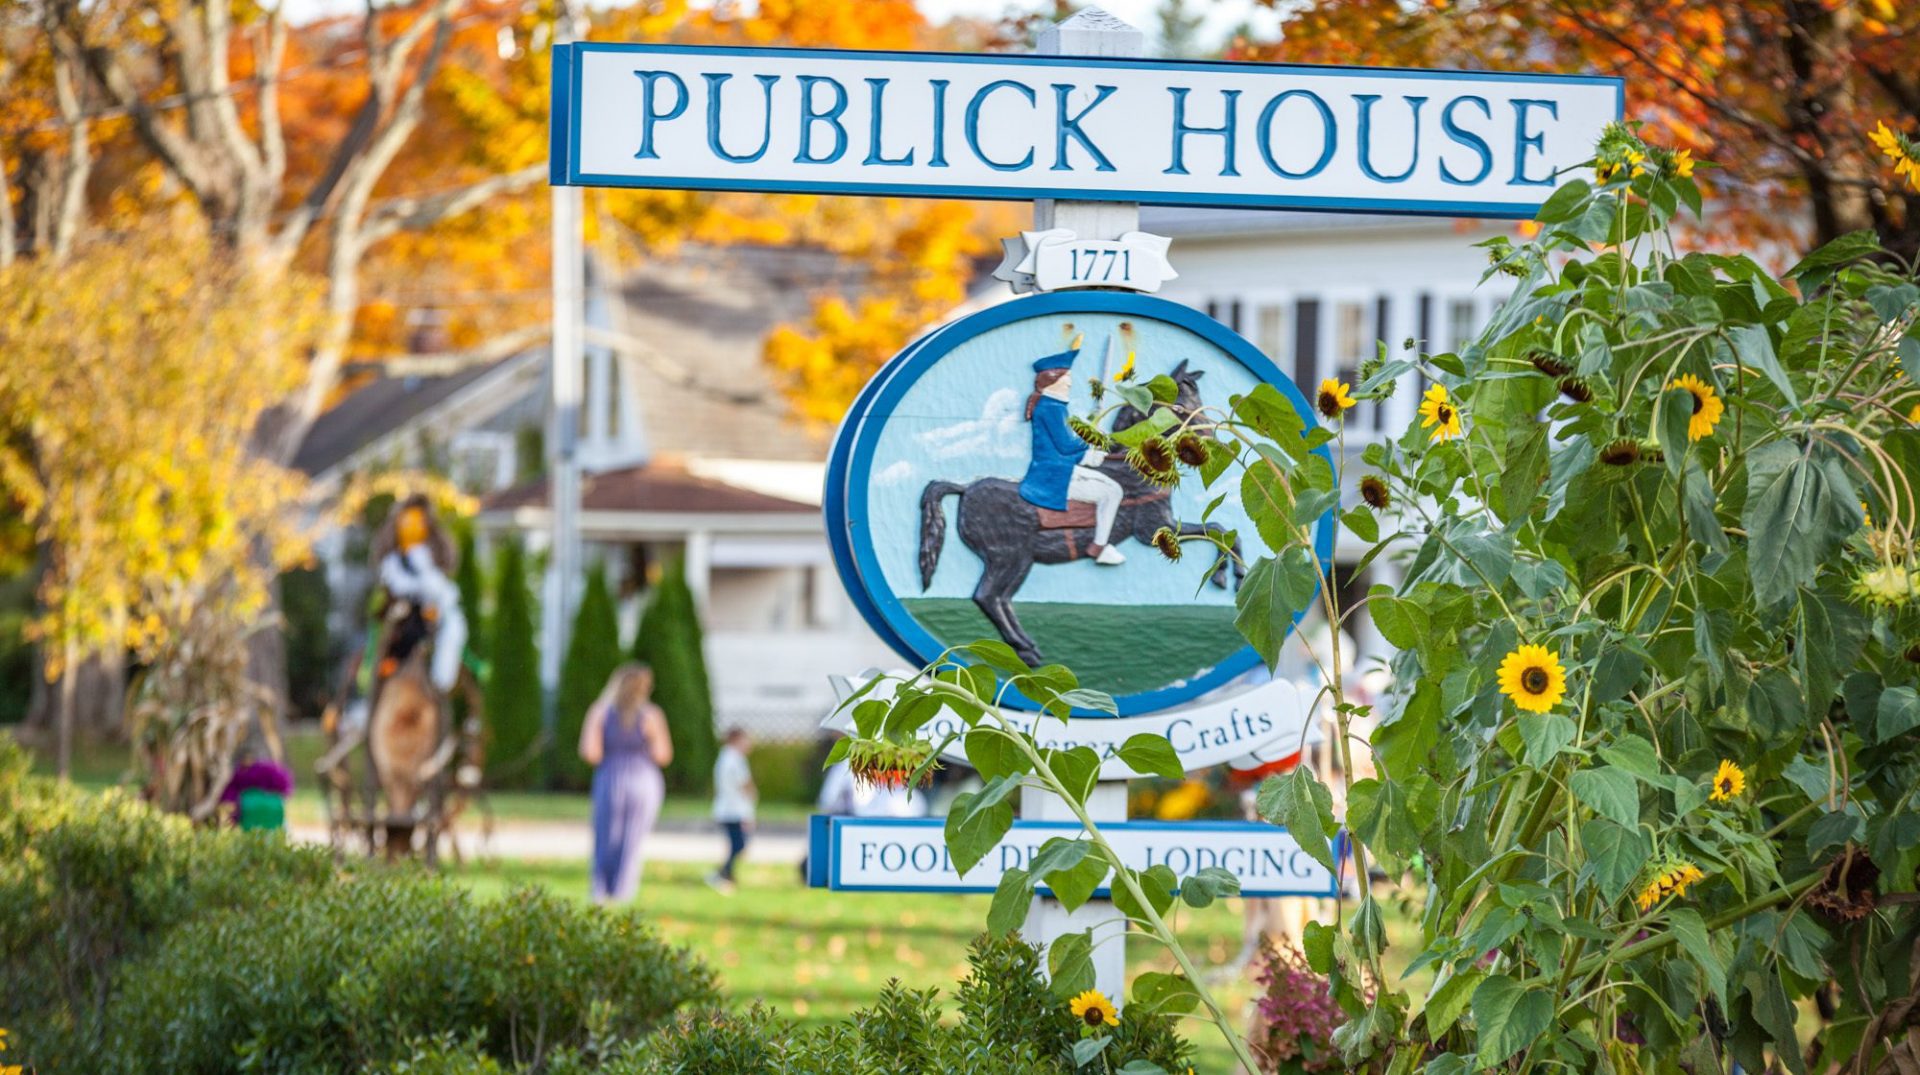 Publick House signage during the fall